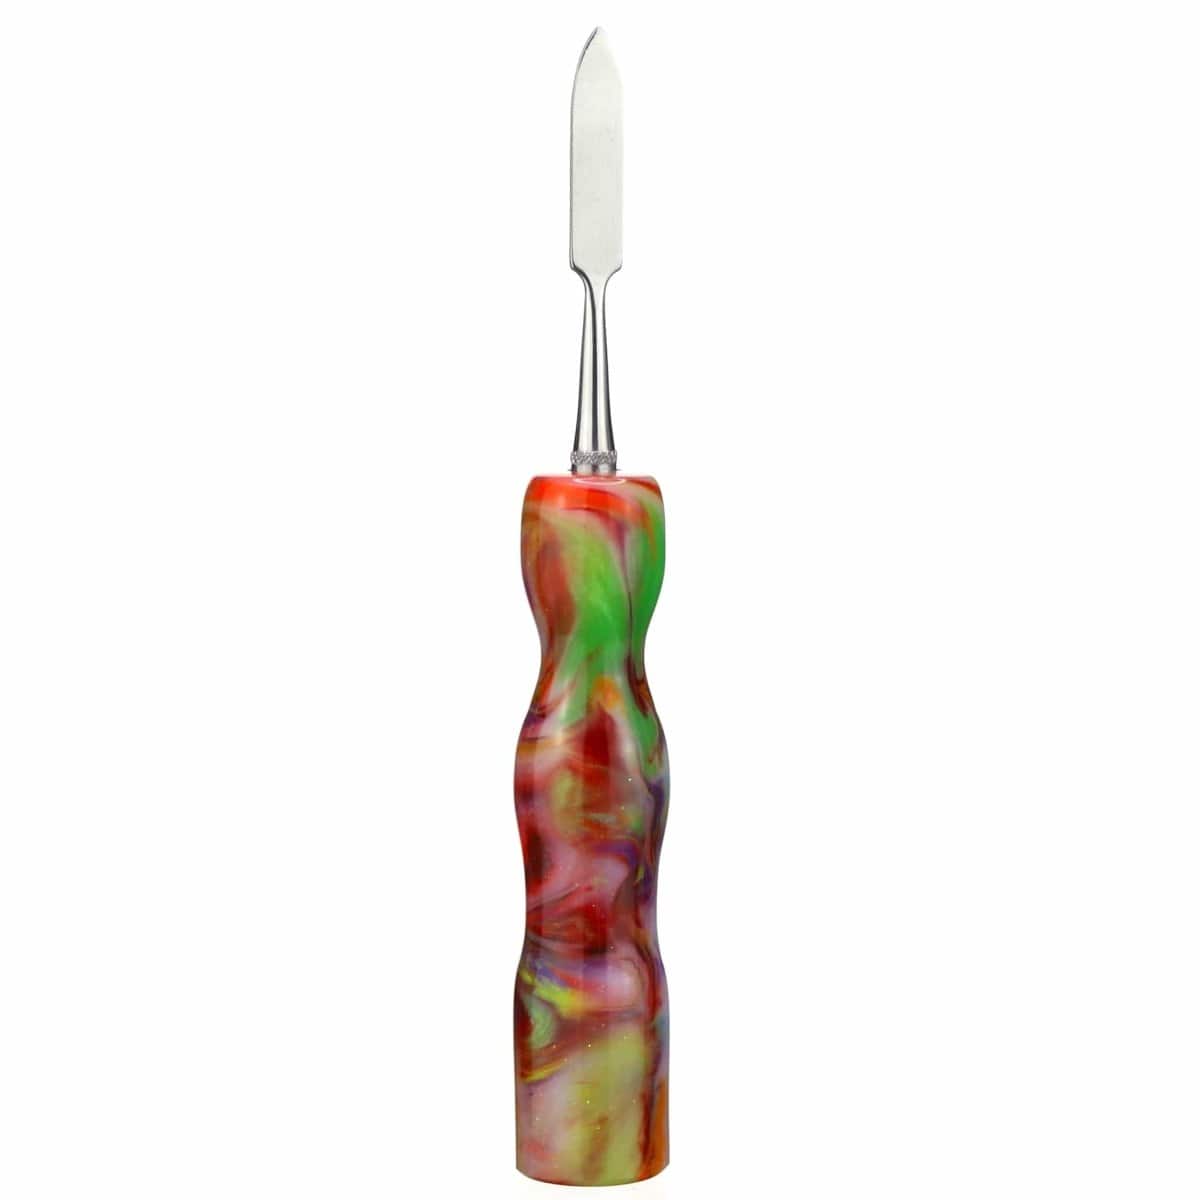 Galactic Crafts Accessory Design 1- Pointed Red Crayon Swirl Resin Dab Tool